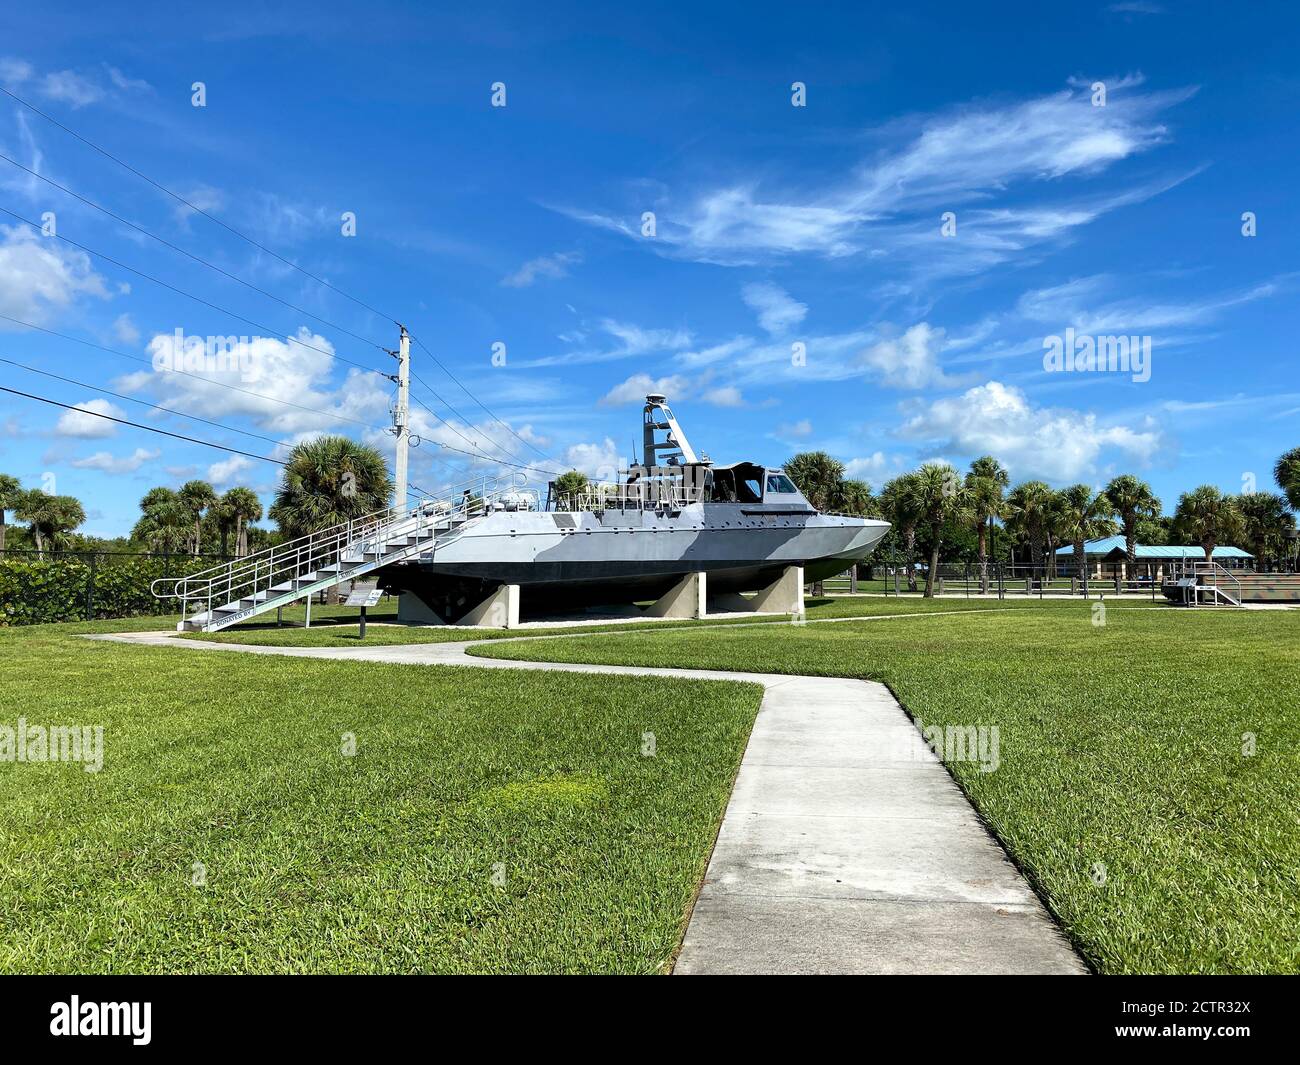 Ft. Pierce,FL/USA-9/17/20: The MK V is a medium range Special Operations Assault Craft used by Navy SEALs in combat. Stock Photo